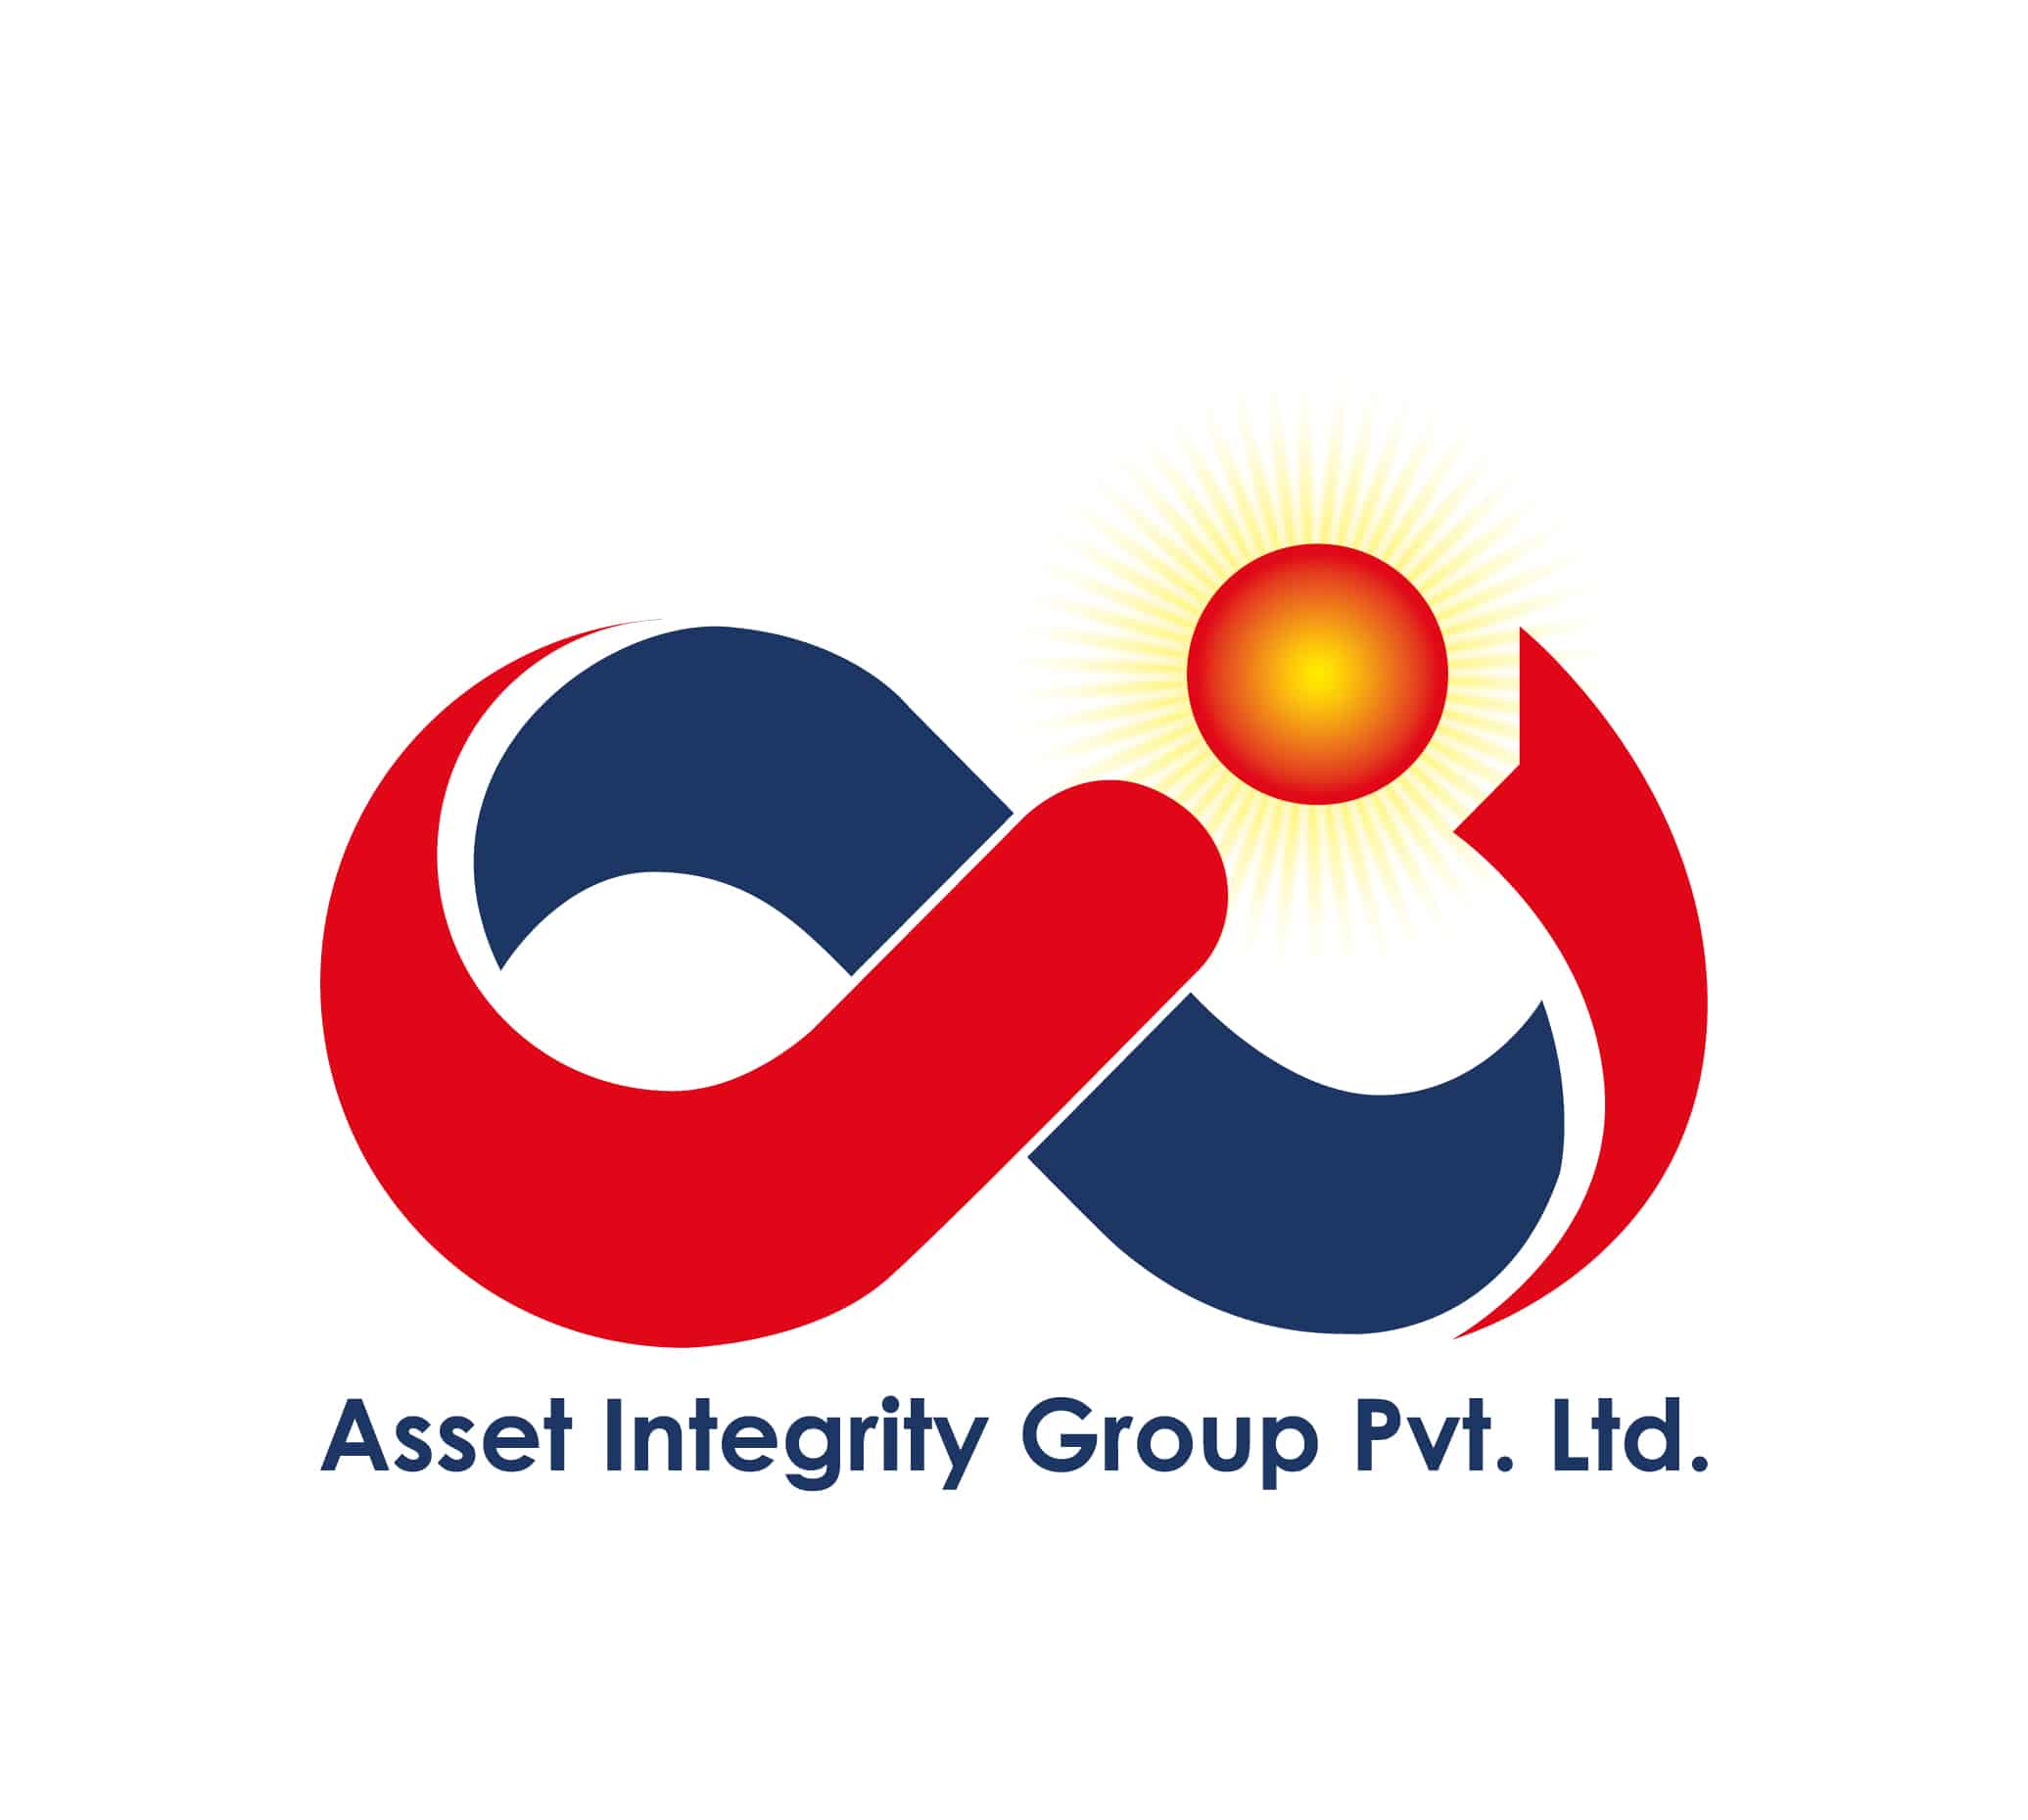 Asset Integrity Group